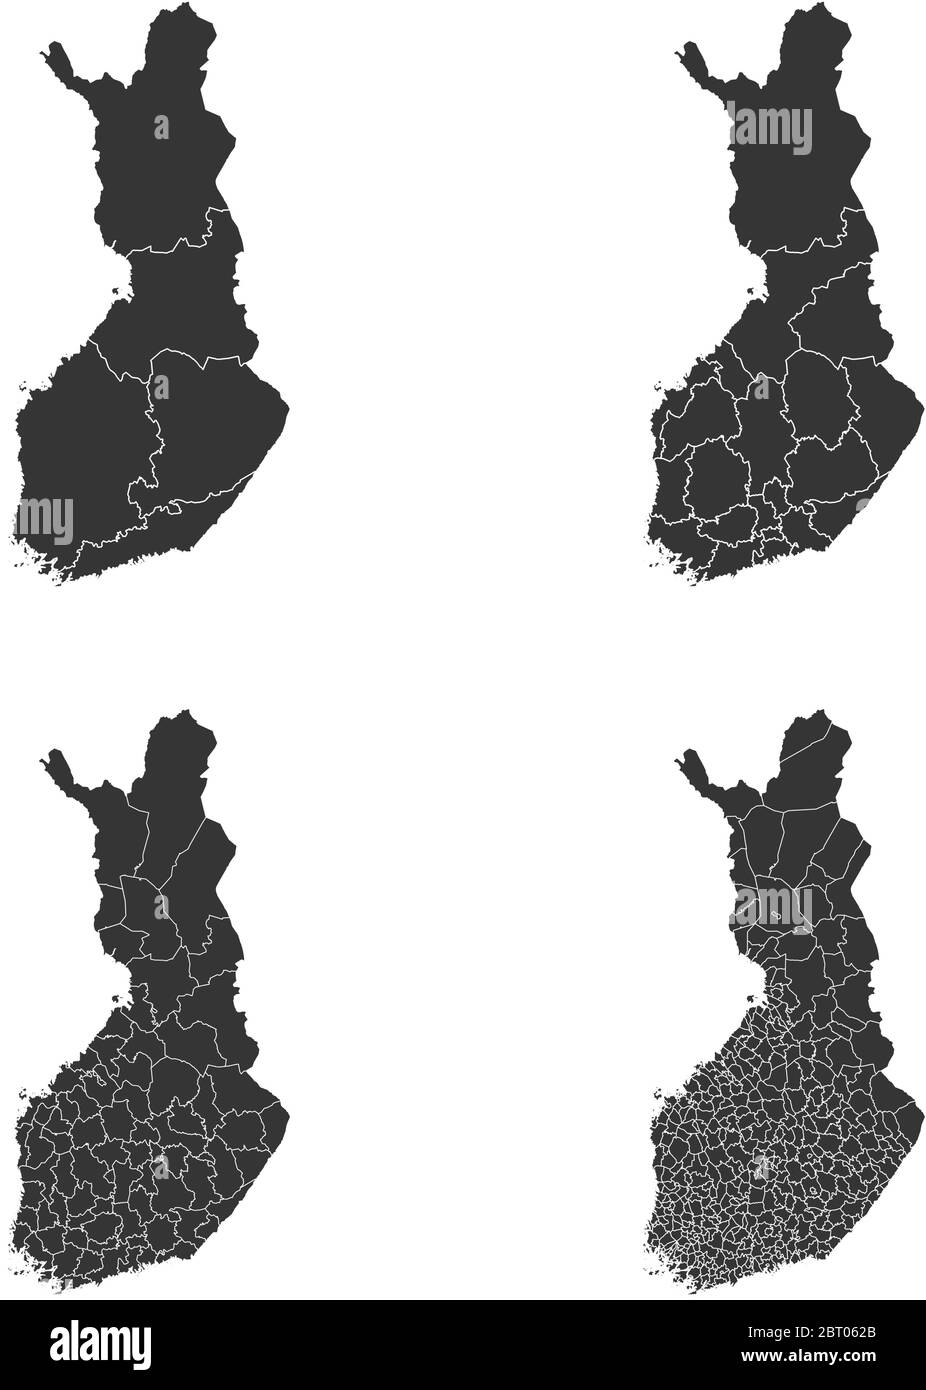 Finland vector maps with administrative regions, municipalities, departments, borders Stock Vector